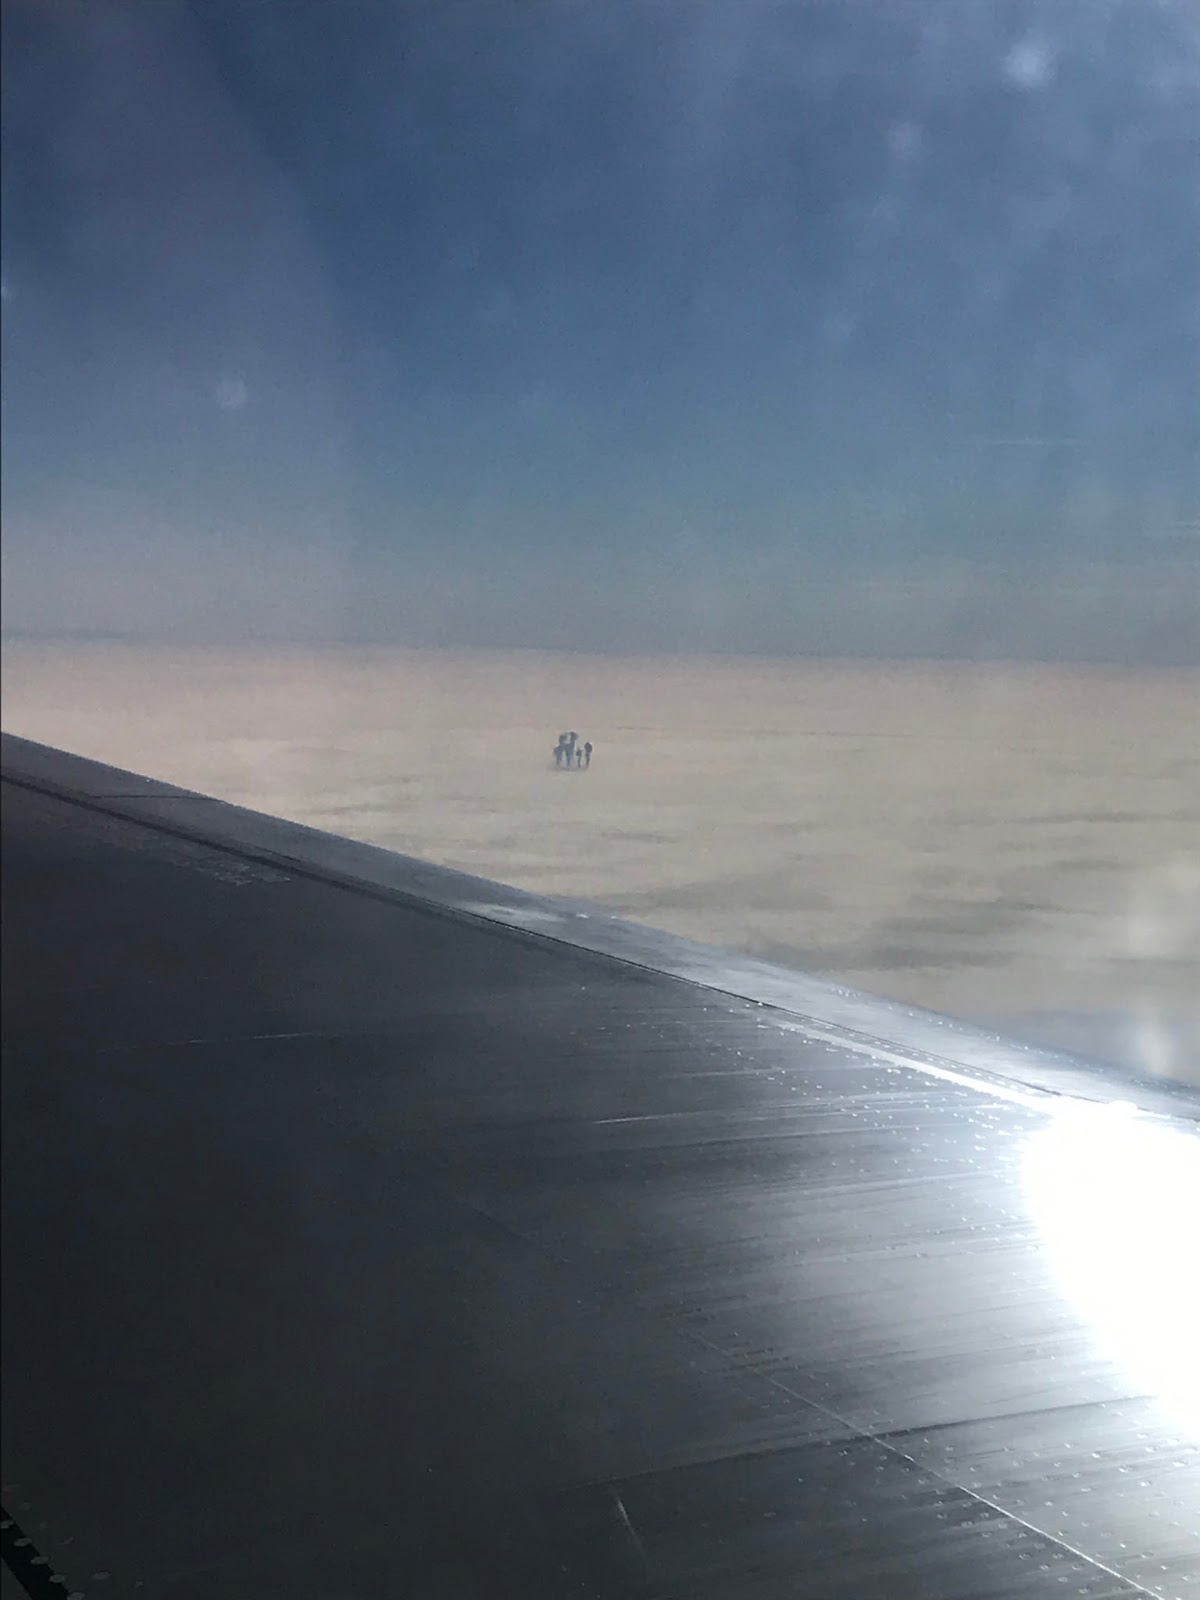 This strange humanoid clouds were observed during a flight Warsaw-London, humanoid cloud, strange cloud warsaw london, strange cloud poland